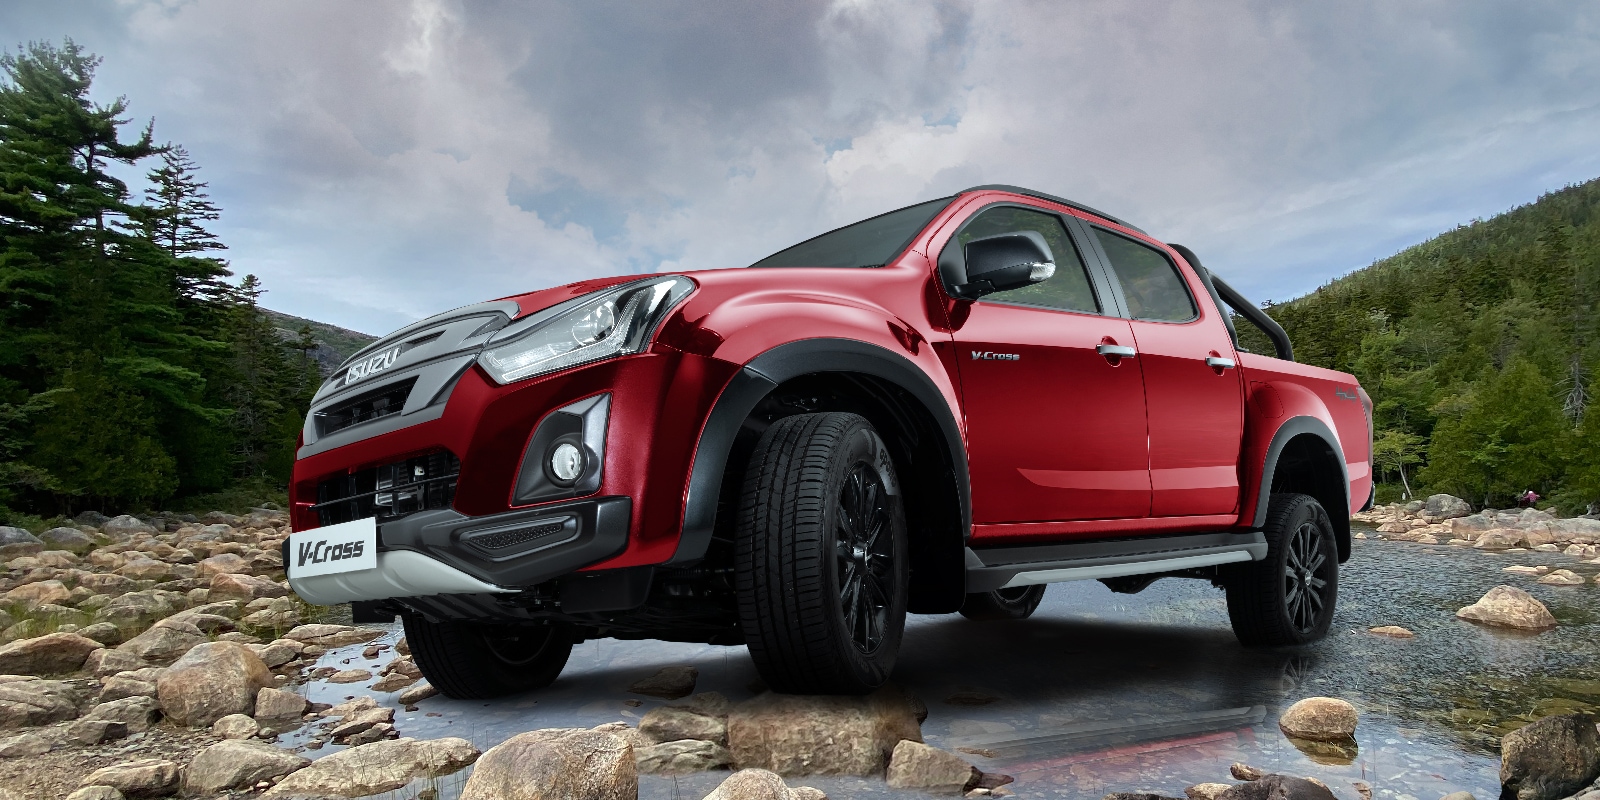 The 2024 Isuzu V Cross Z Prestige now gets traction control, ESC, Hill Descent Control and Hill Start Assist across all manual variants